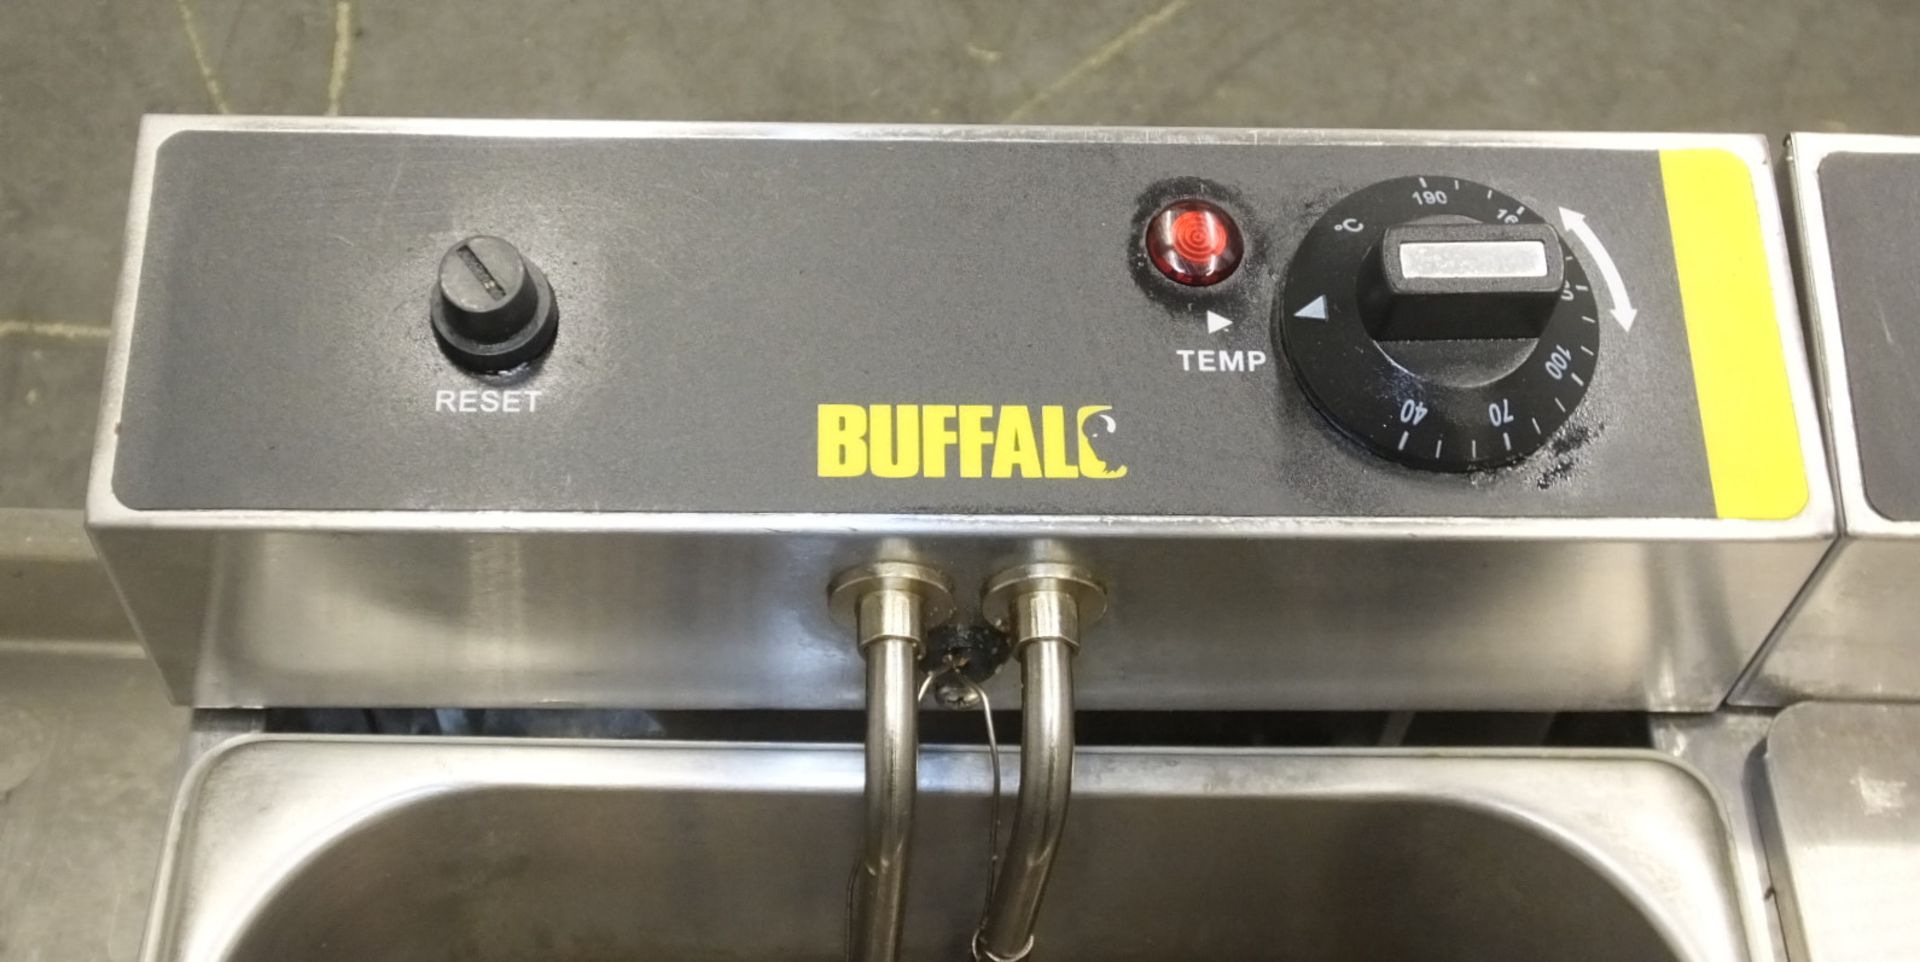 Buffalo L485-03 Double Electric Fryer on Stainless Steel Unit - L850 x D600 x H630mm (dime - Image 4 of 8